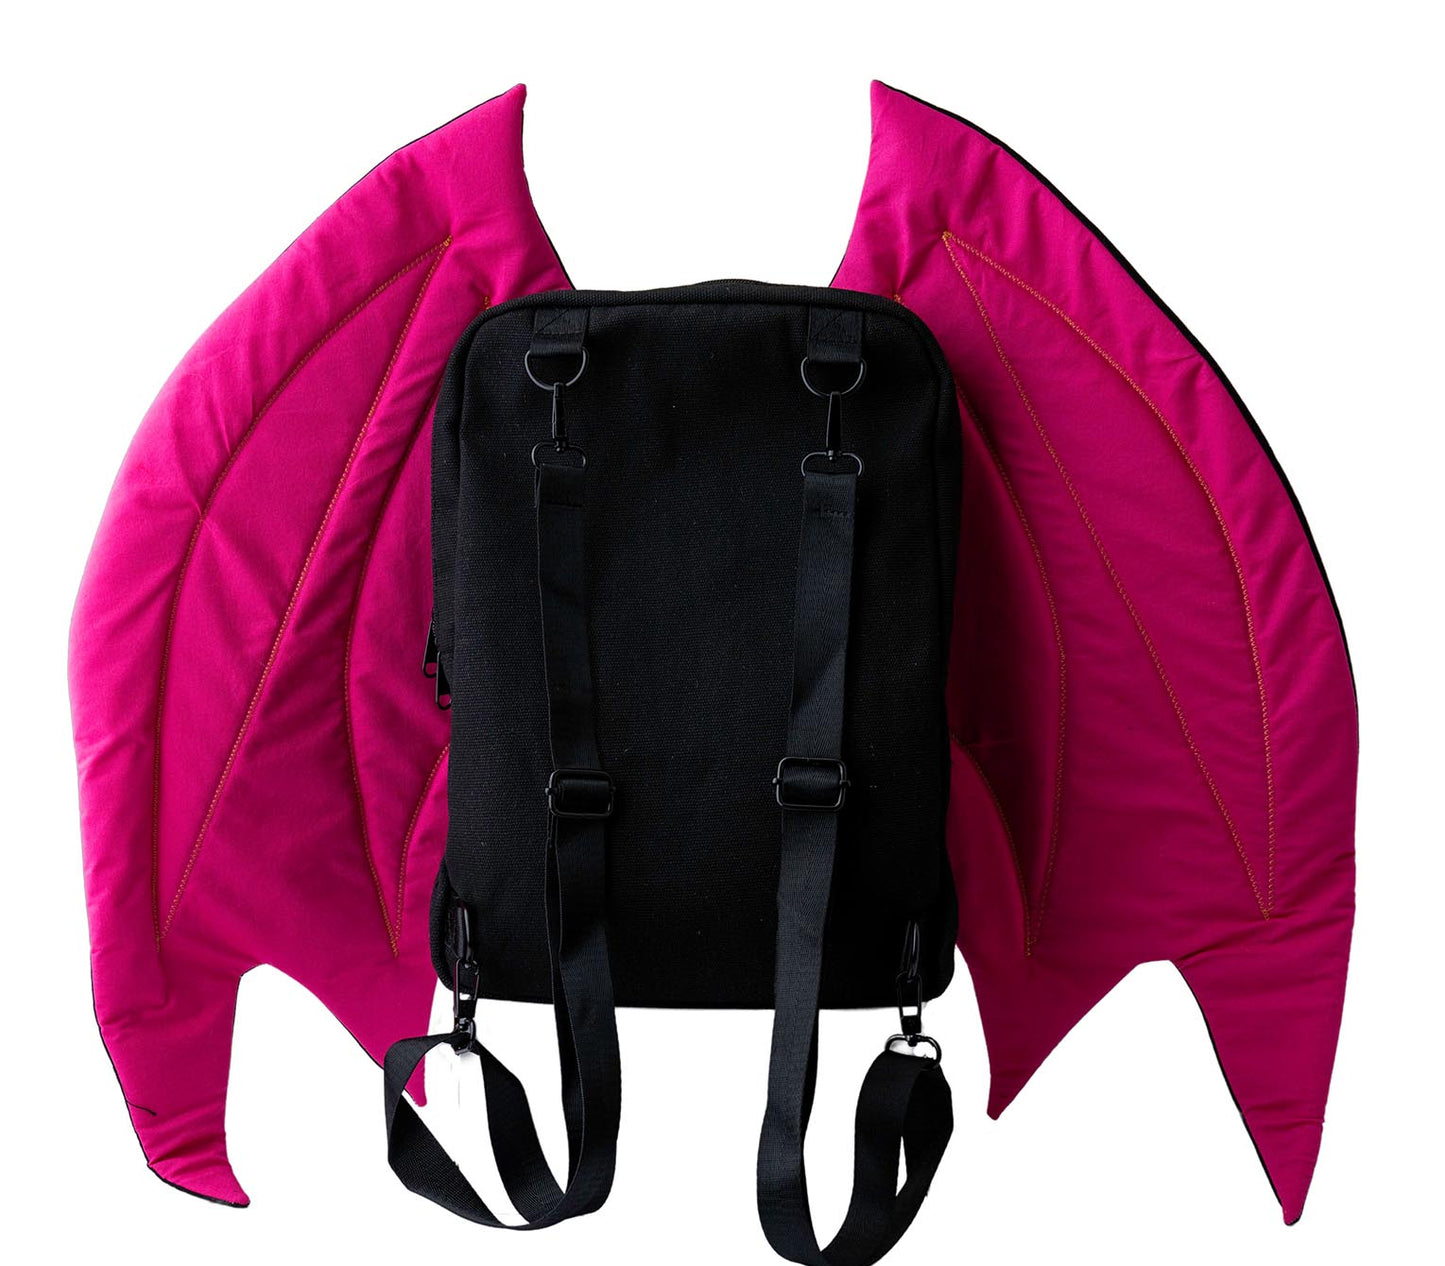 Large Pink Dragon Wing Backpack